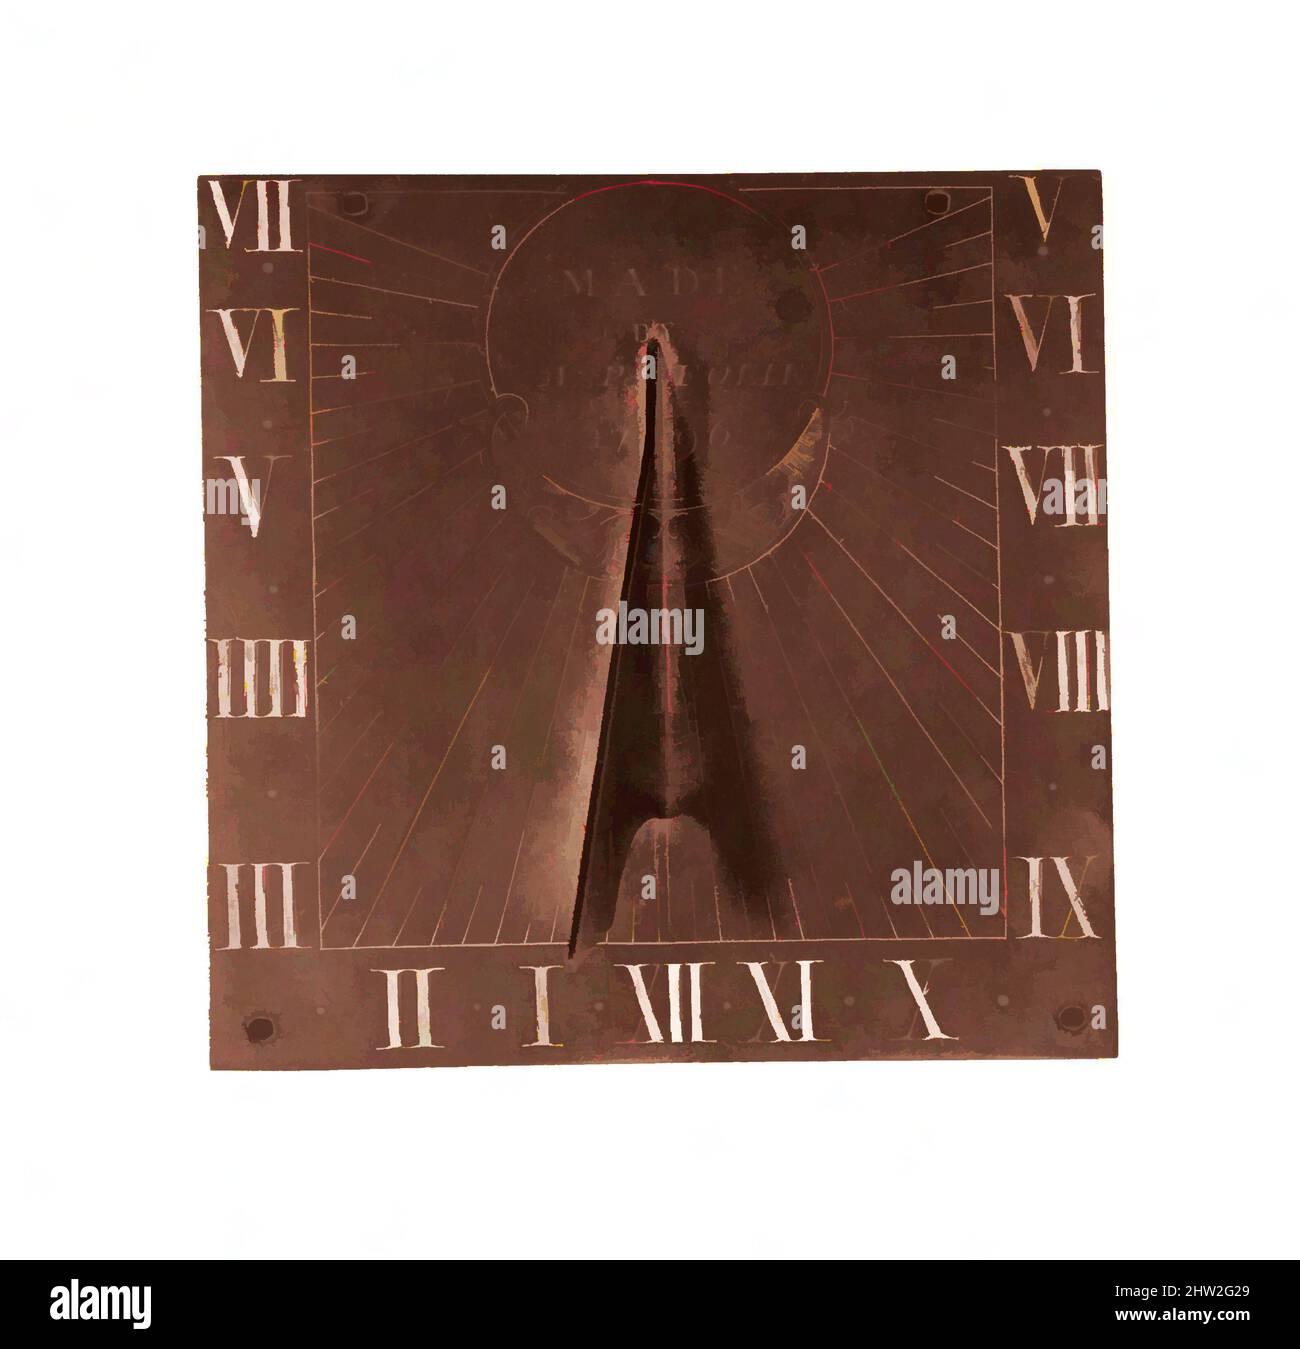 Art inspired by Sundial, 1796, Brass, 4 1/2 x 4 1/2 in. (11.4 x 11.4 cm), Metal, A. P. Folie, Classic works modernized by Artotop with a splash of modernity. Shapes, color and value, eye-catching visual impact on art. Emotions through freedom of artworks in a contemporary way. A timeless message pursuing a wildly creative new direction. Artists turning to the digital medium and creating the Artotop NFT Stock Photo